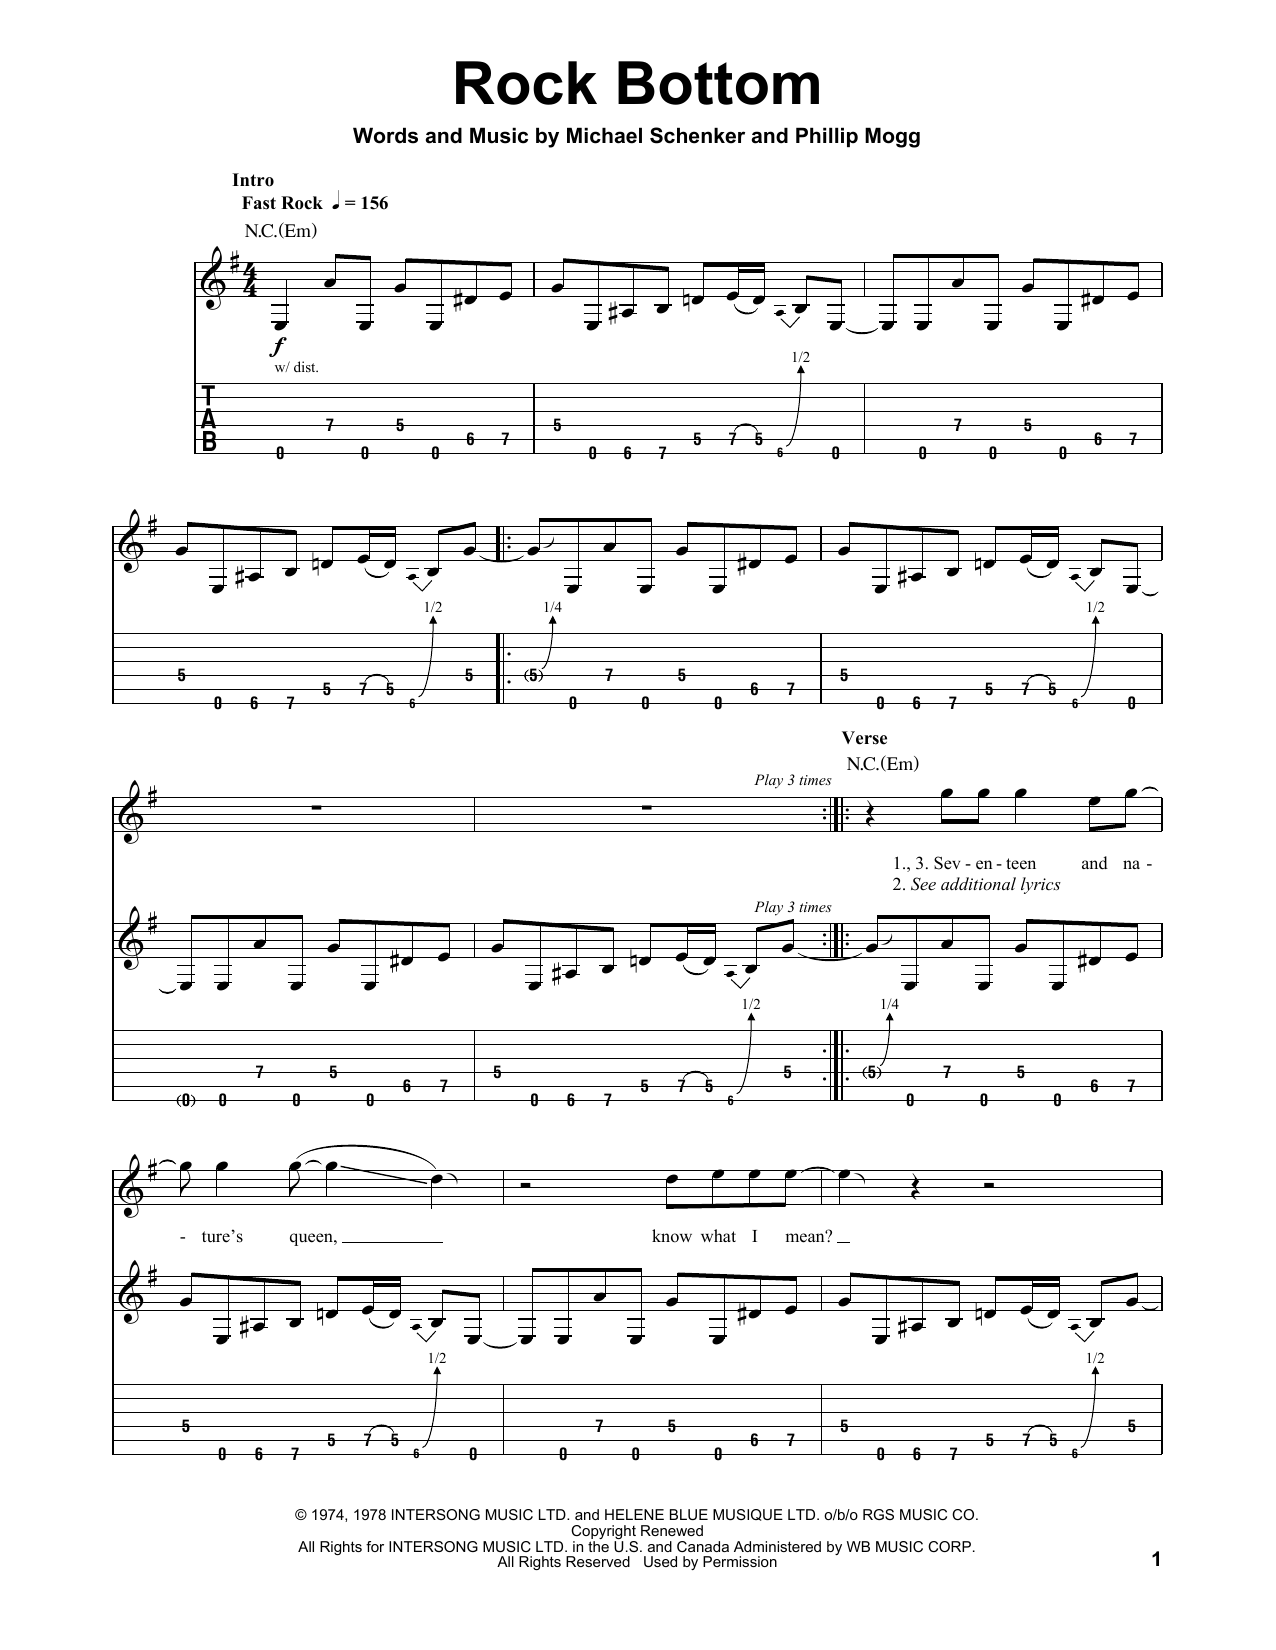 UFO Rock Bottom sheet music notes and chords. Download Printable PDF.